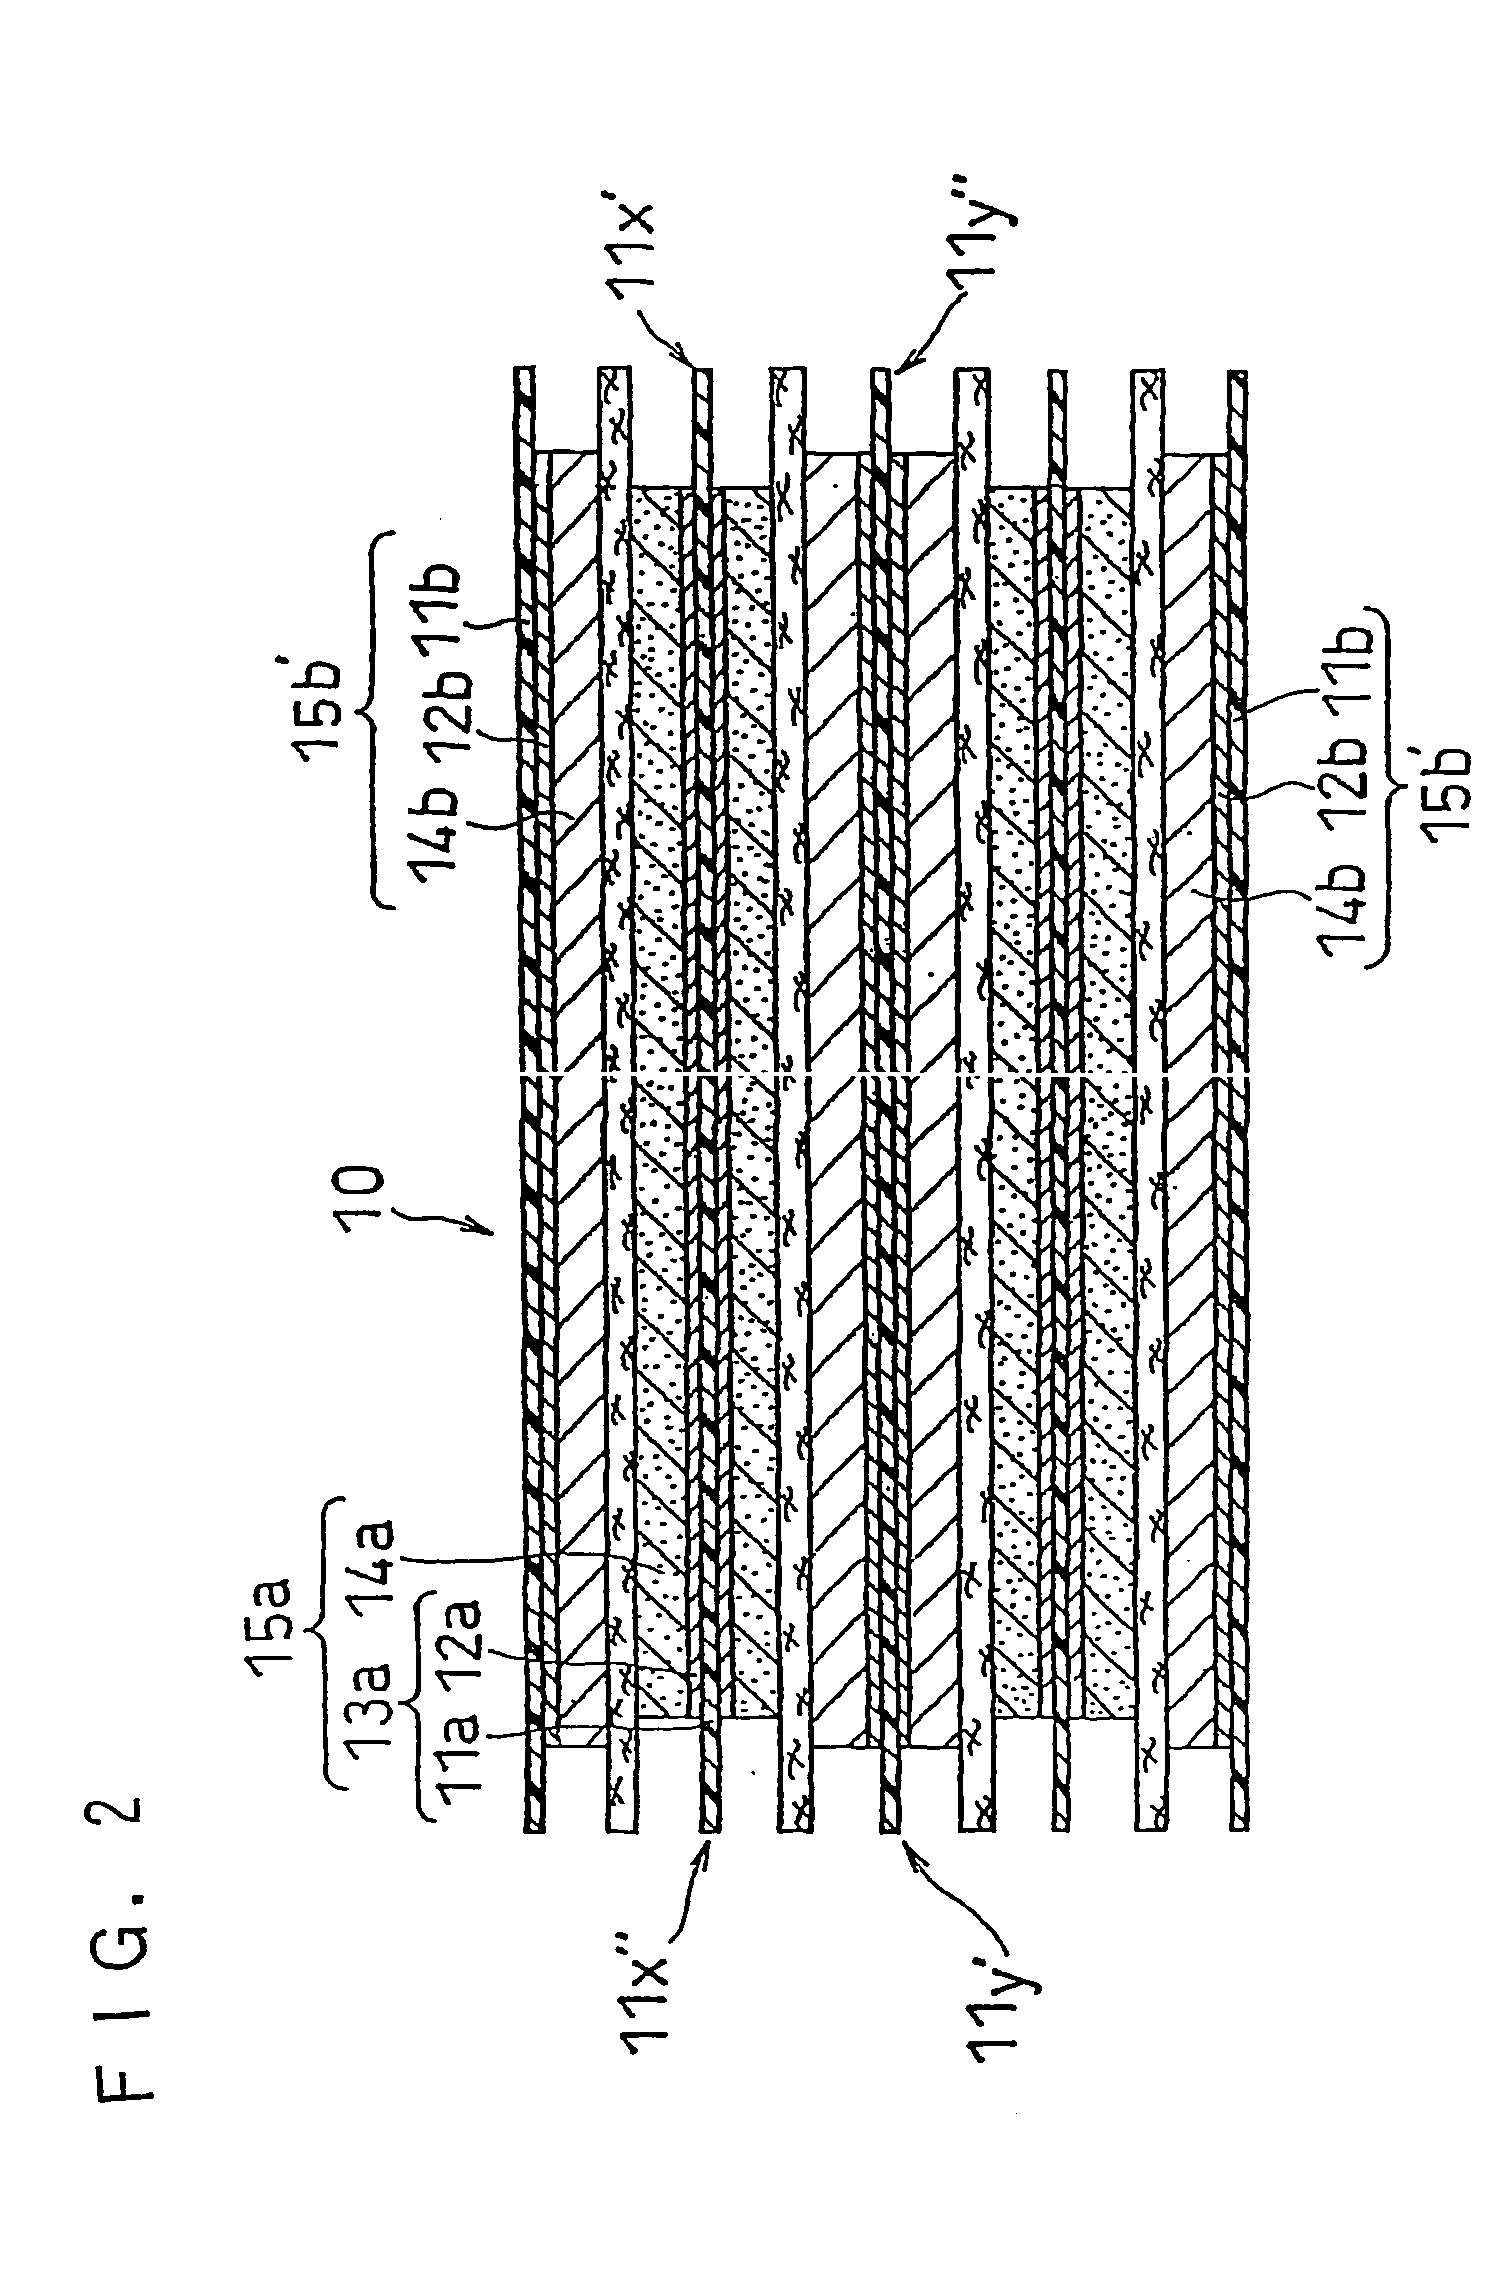 Electrochemical device and method for manaufacturing same